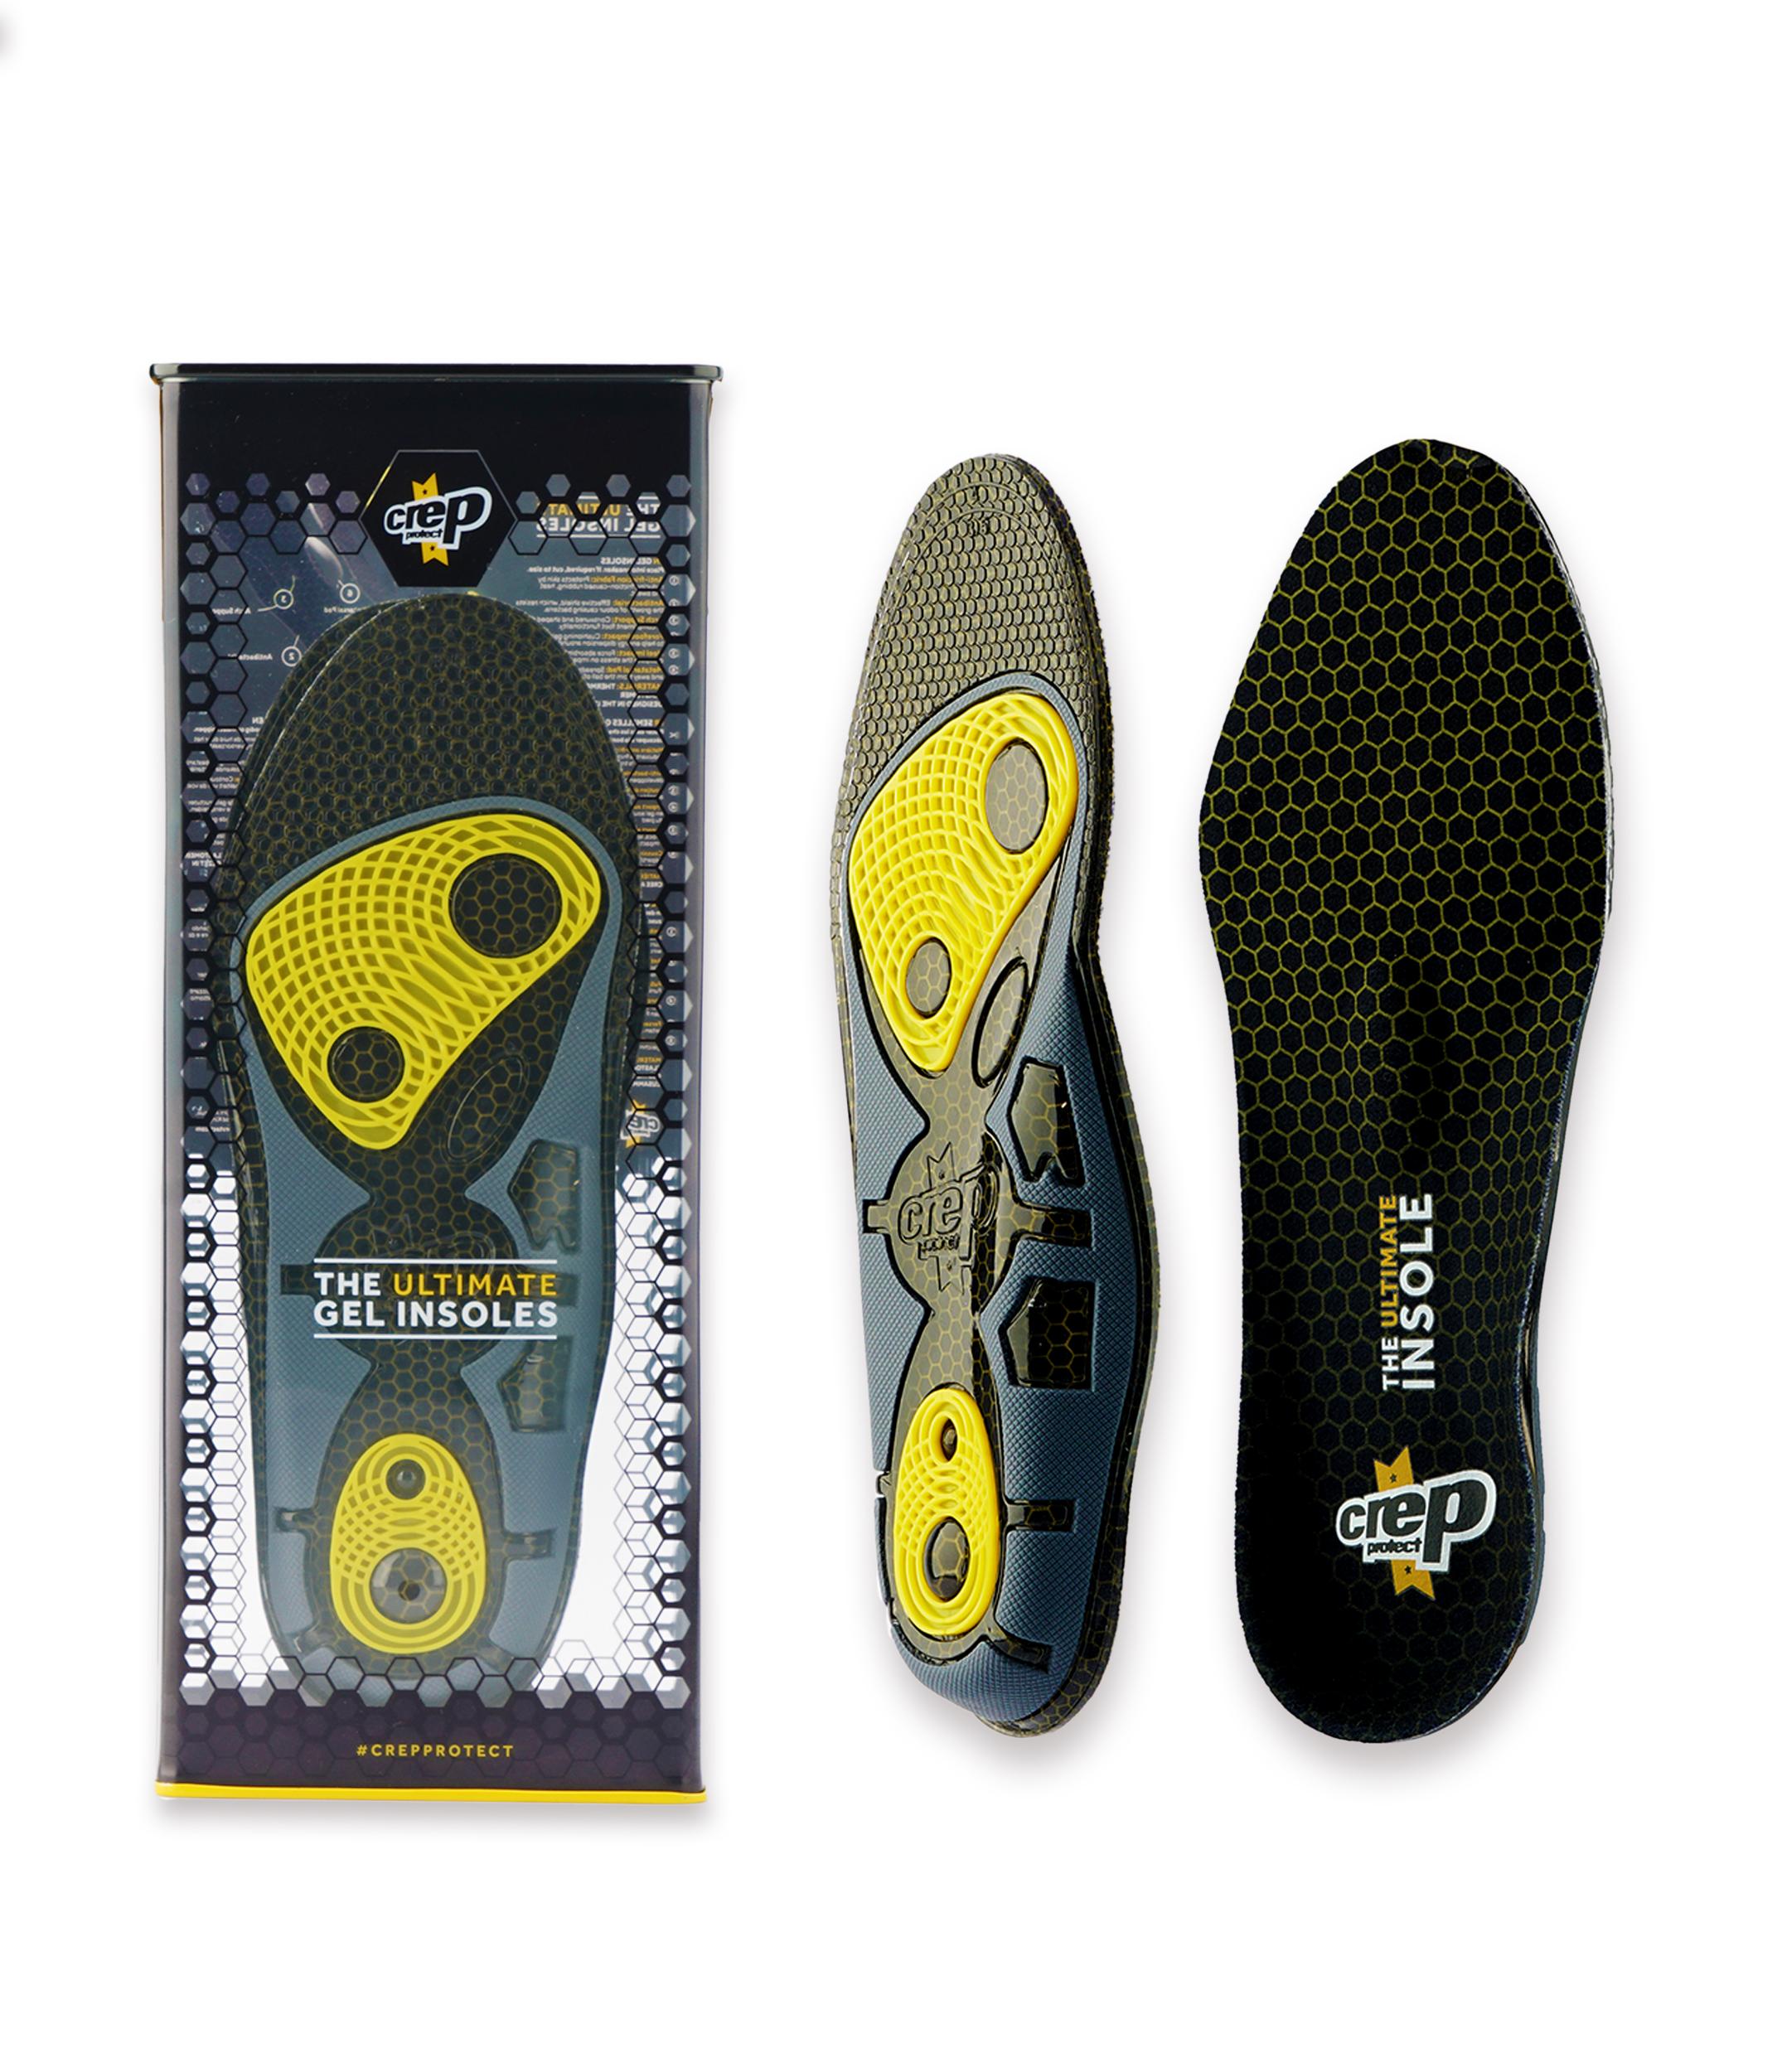 Crep Protect GEL INSOLES – “UK 3.5-4.5 / US 4.5-5.5 “